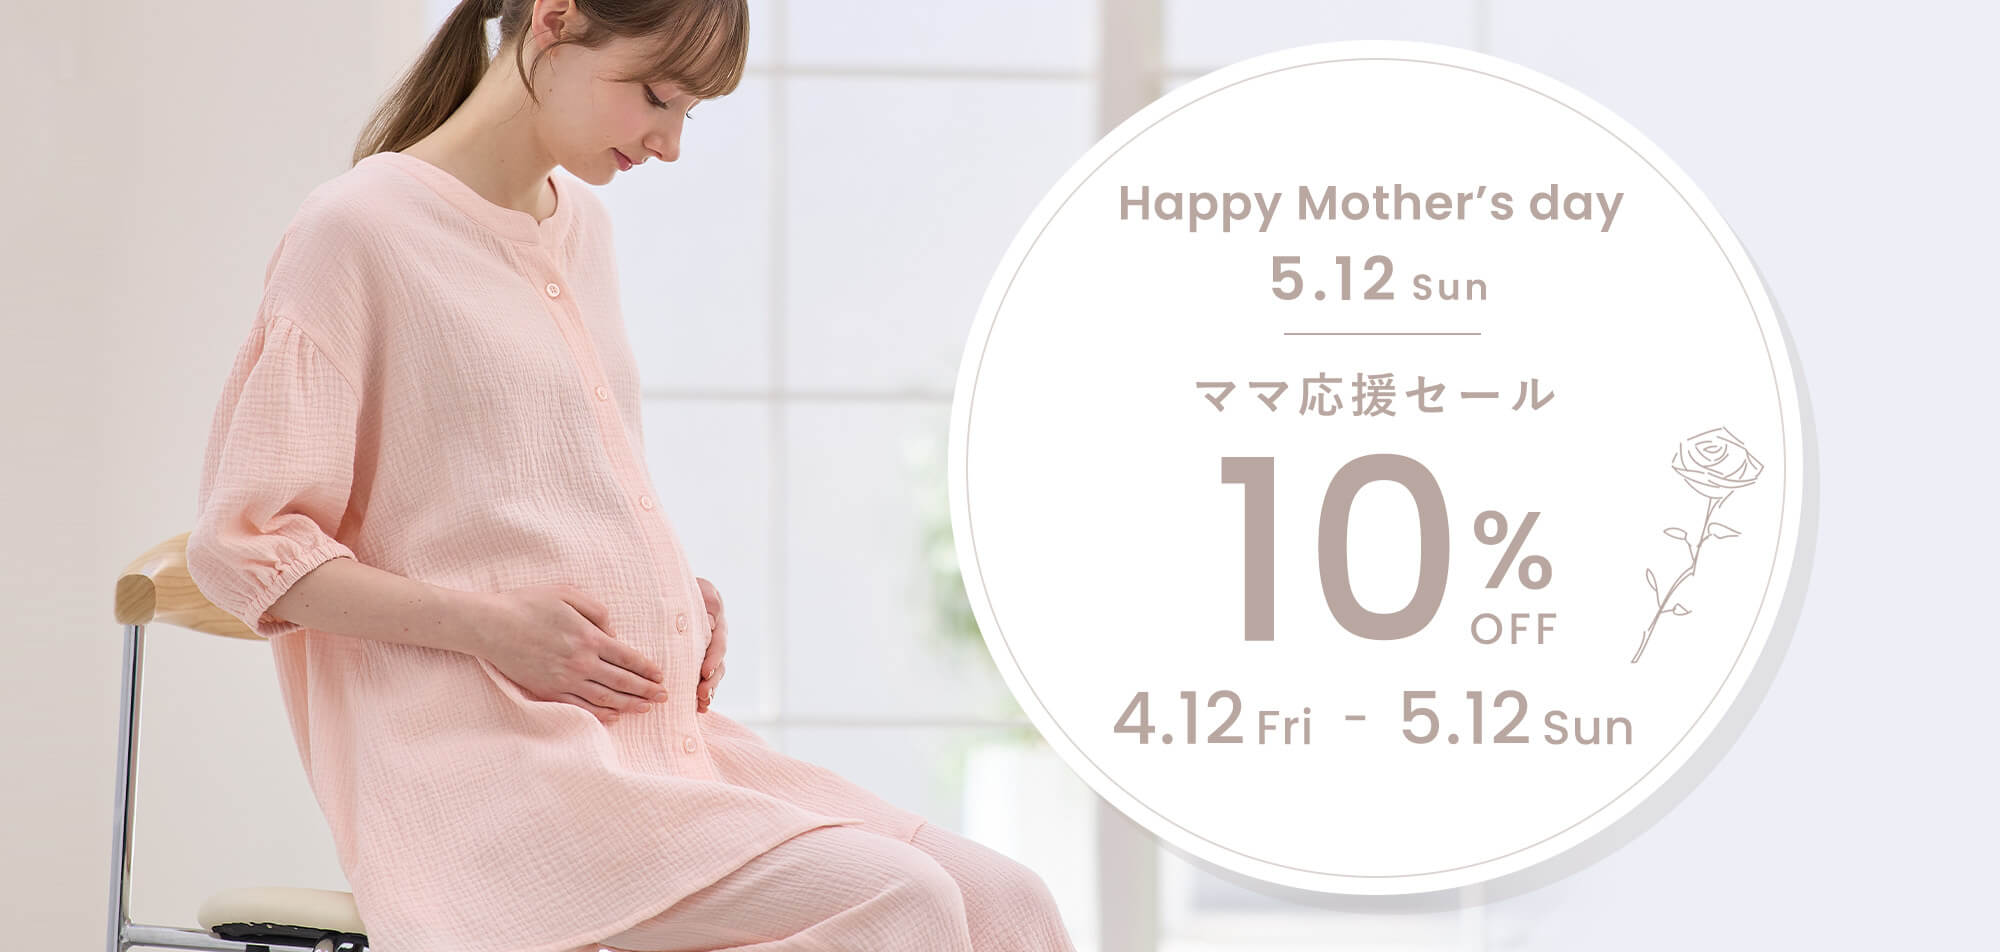 Happy Mother's Day SALE